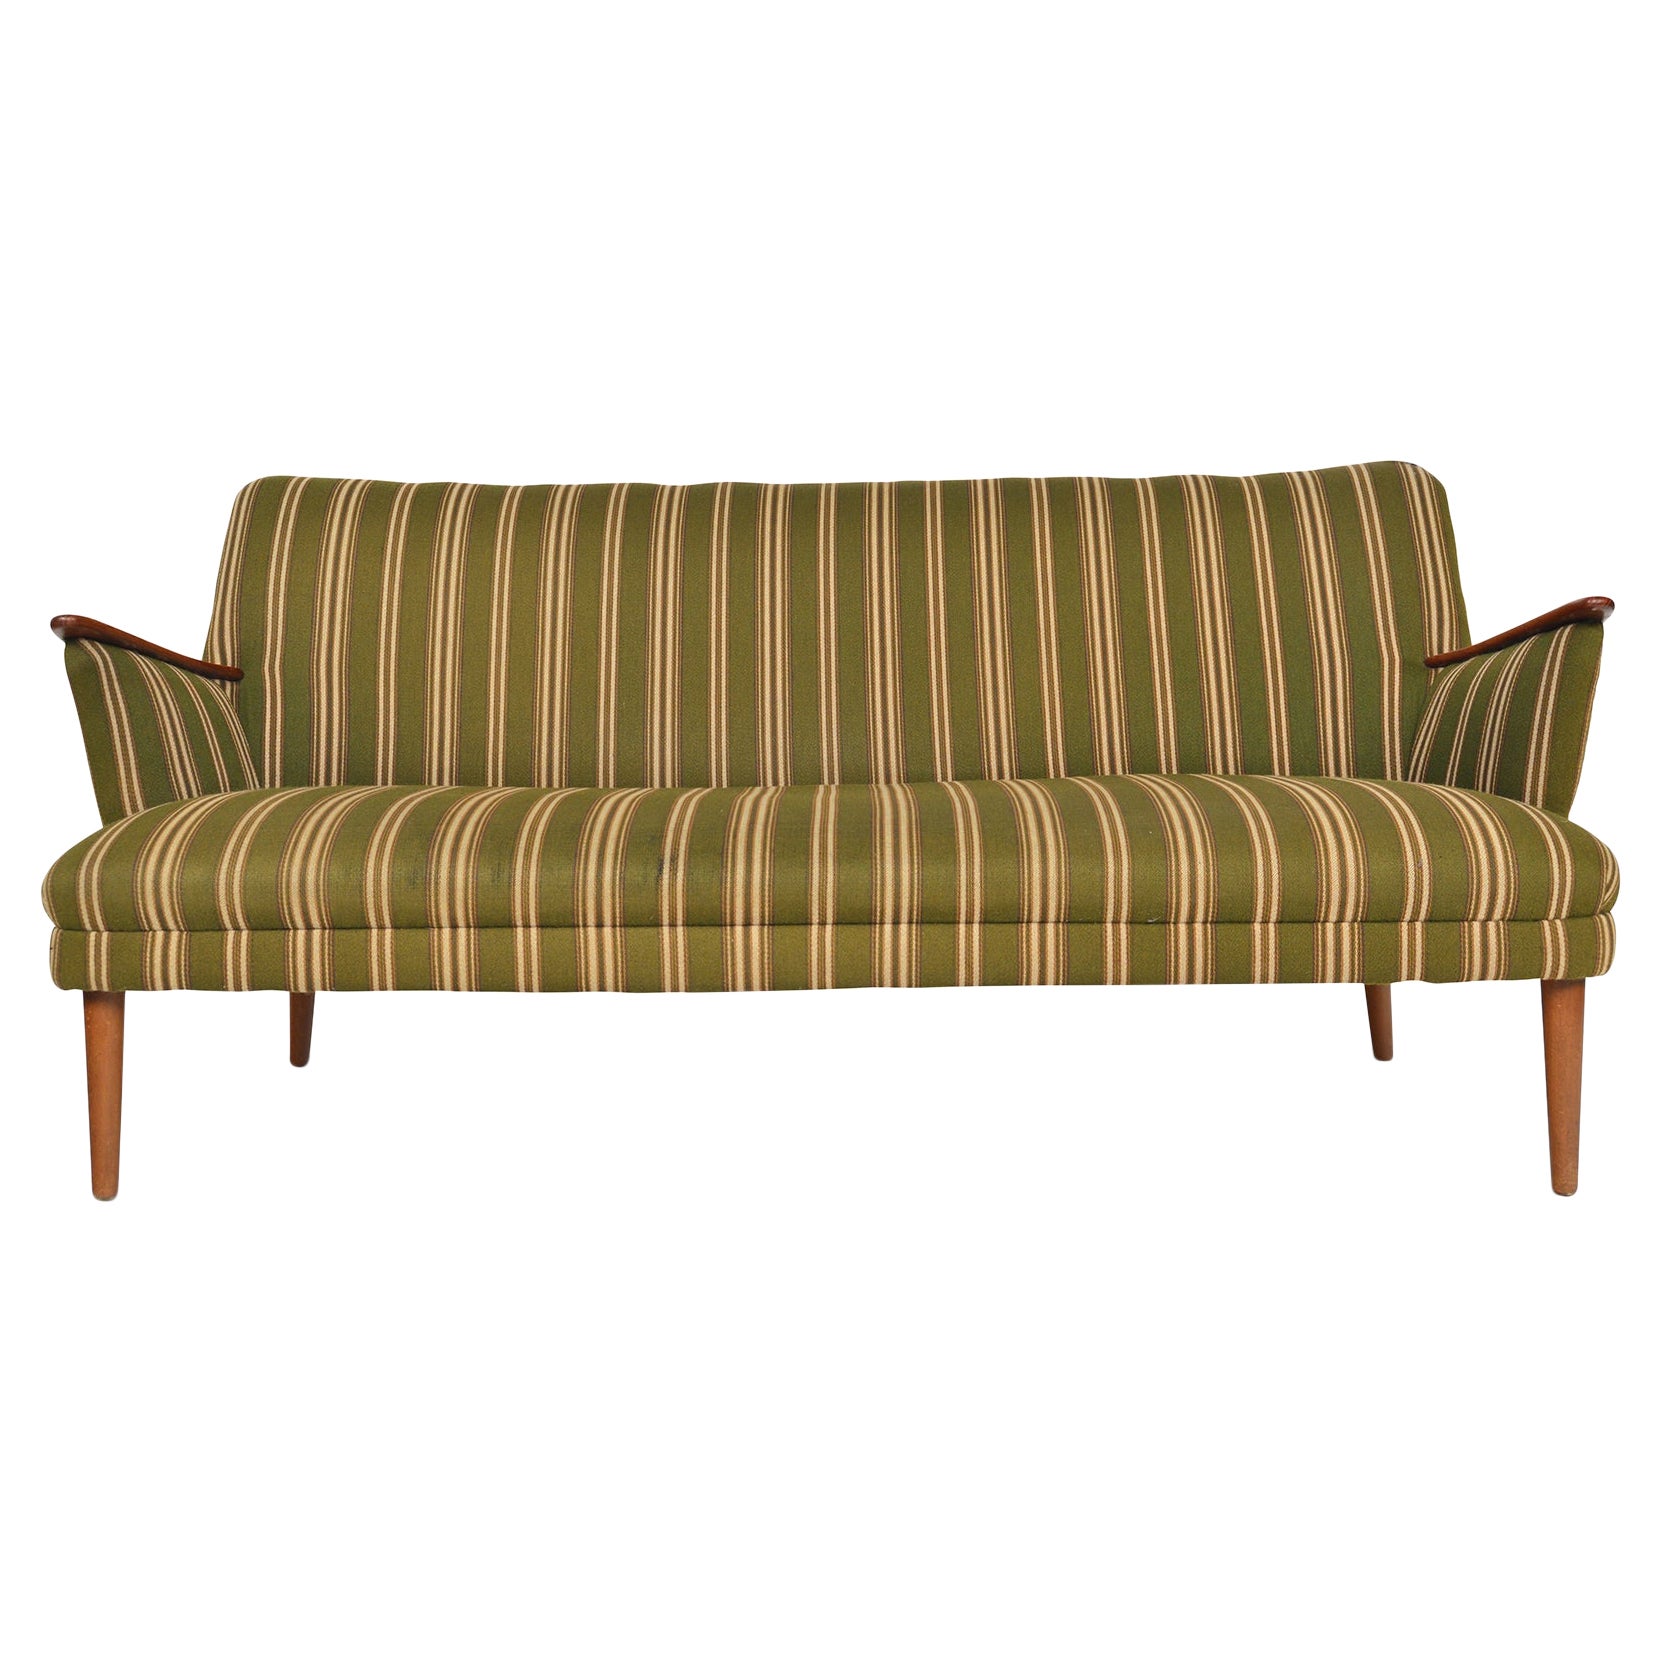 Danish Modern Sofa in Green Striped Wool with Teak Paws For Sale